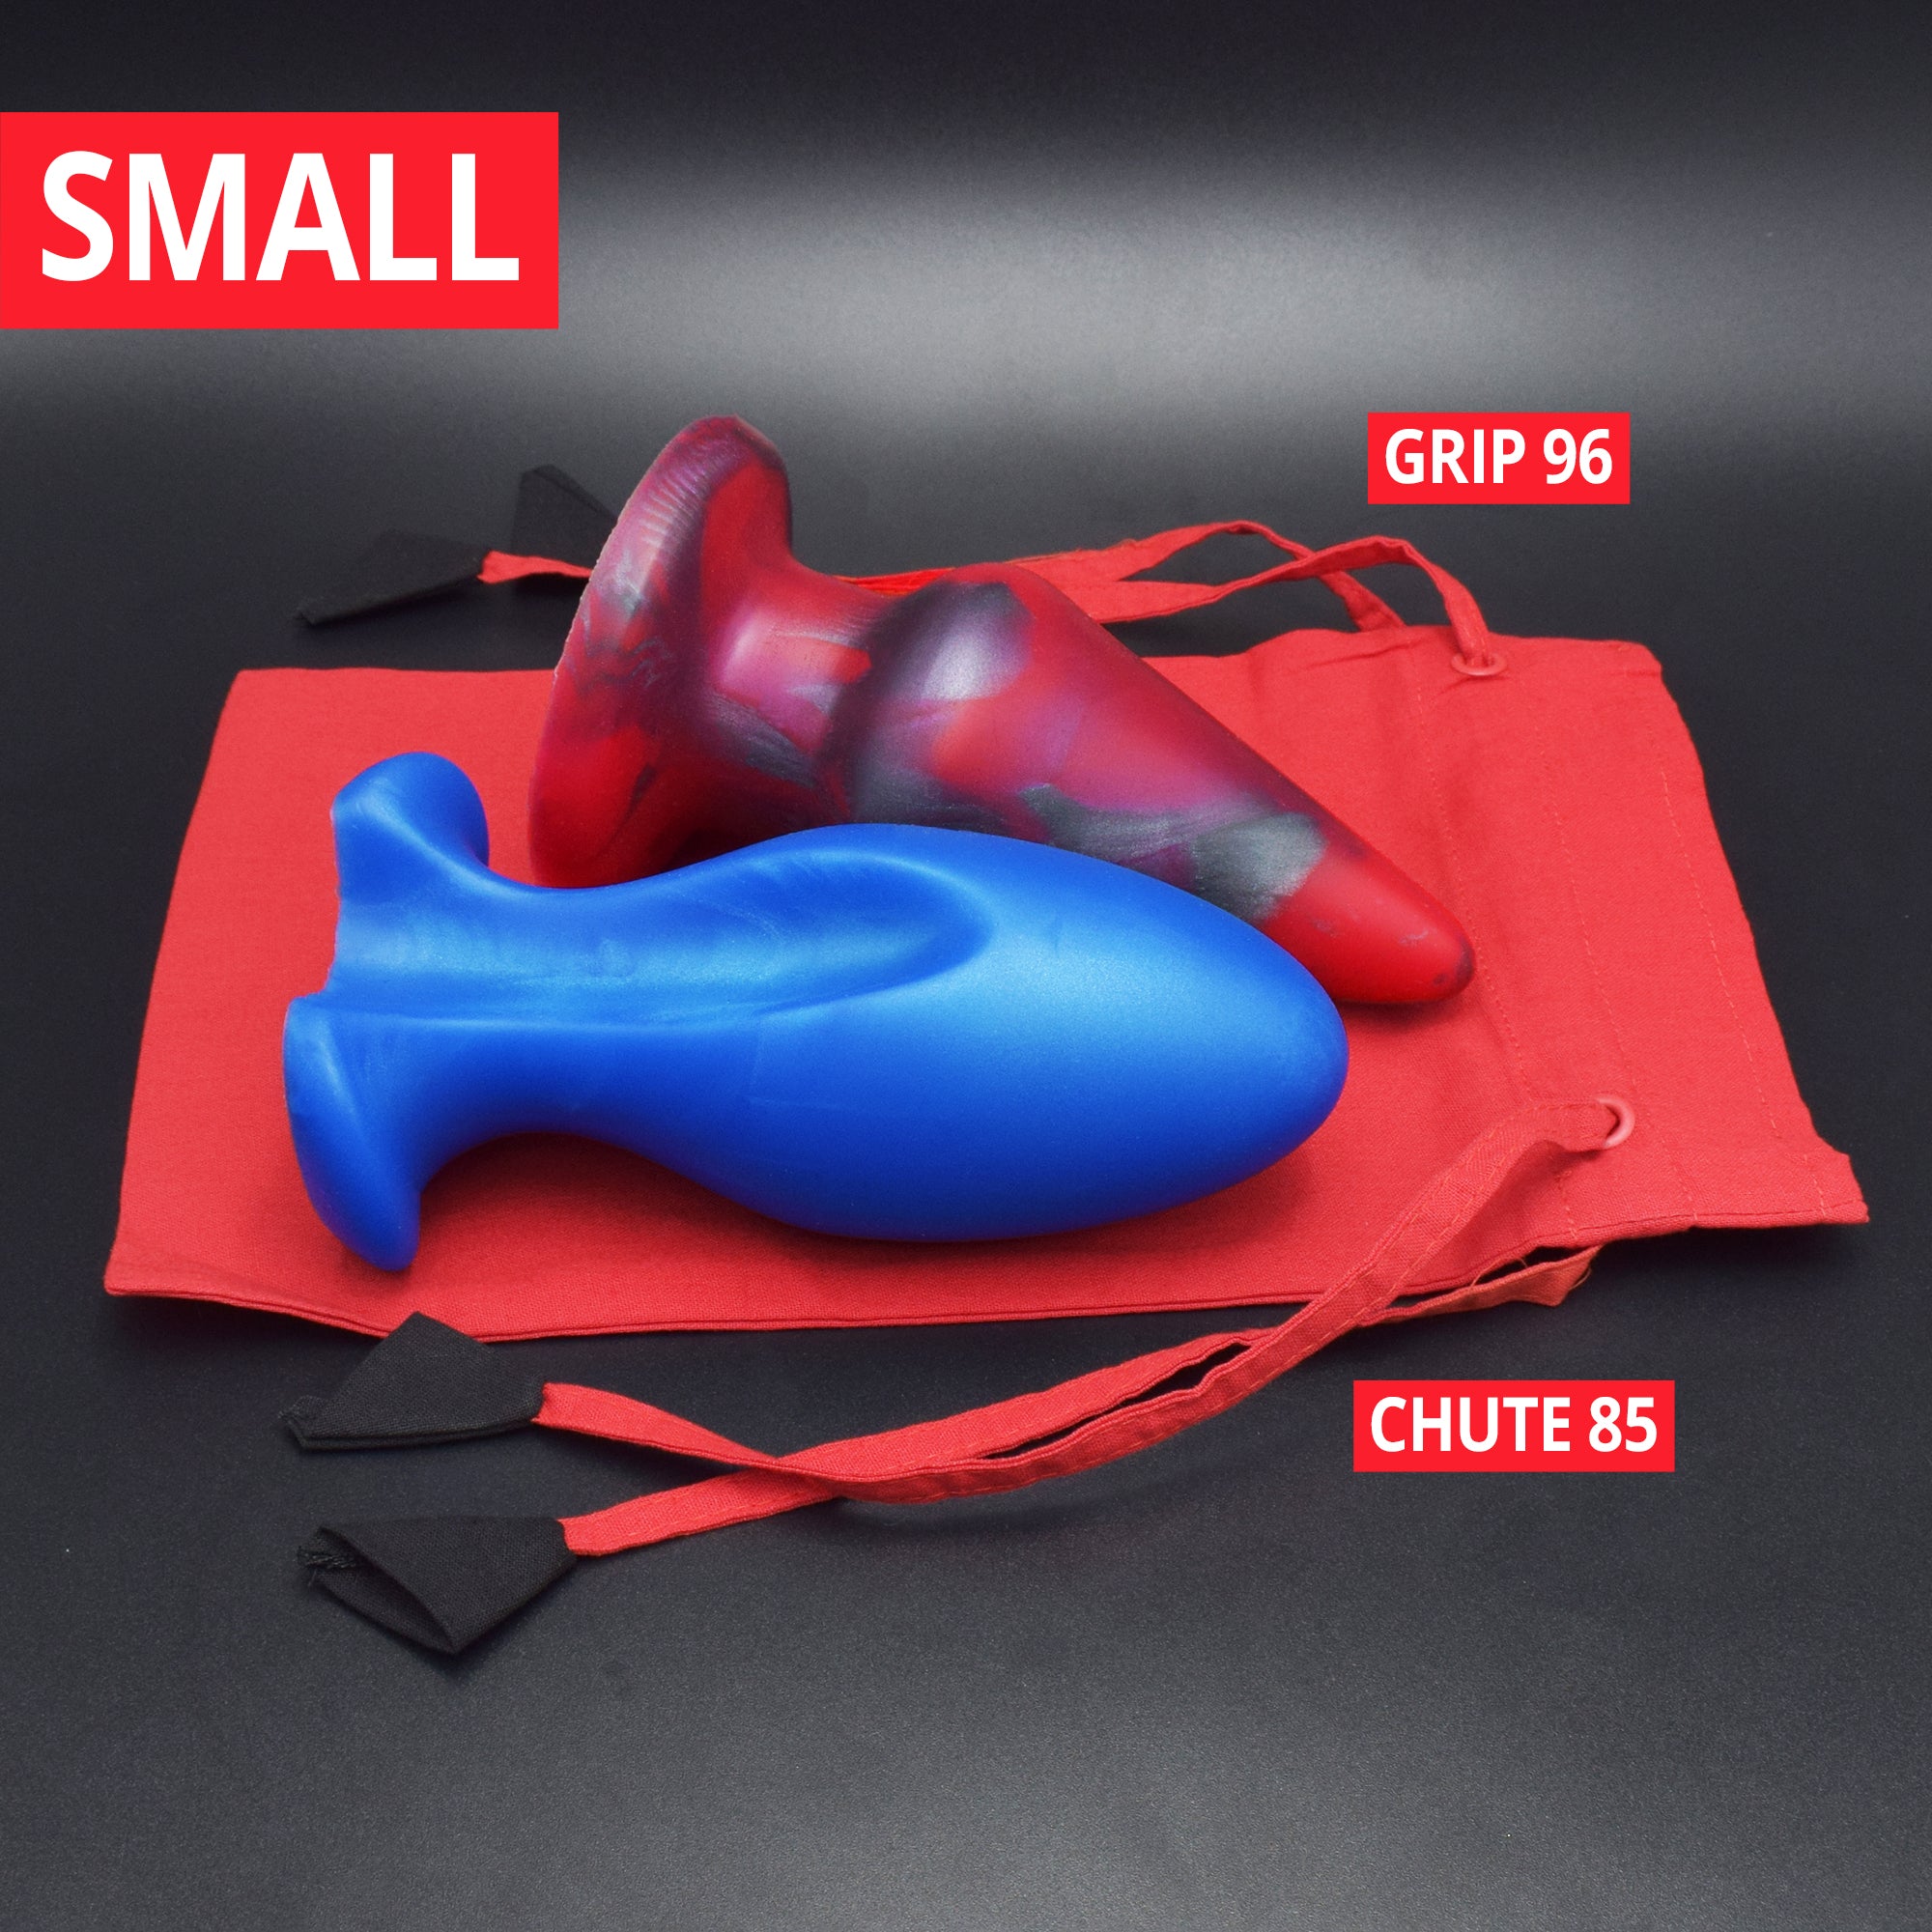 Small Topped Toys Bag with Grip 96 in Forge Red, and Chute 85 in Blue Steel